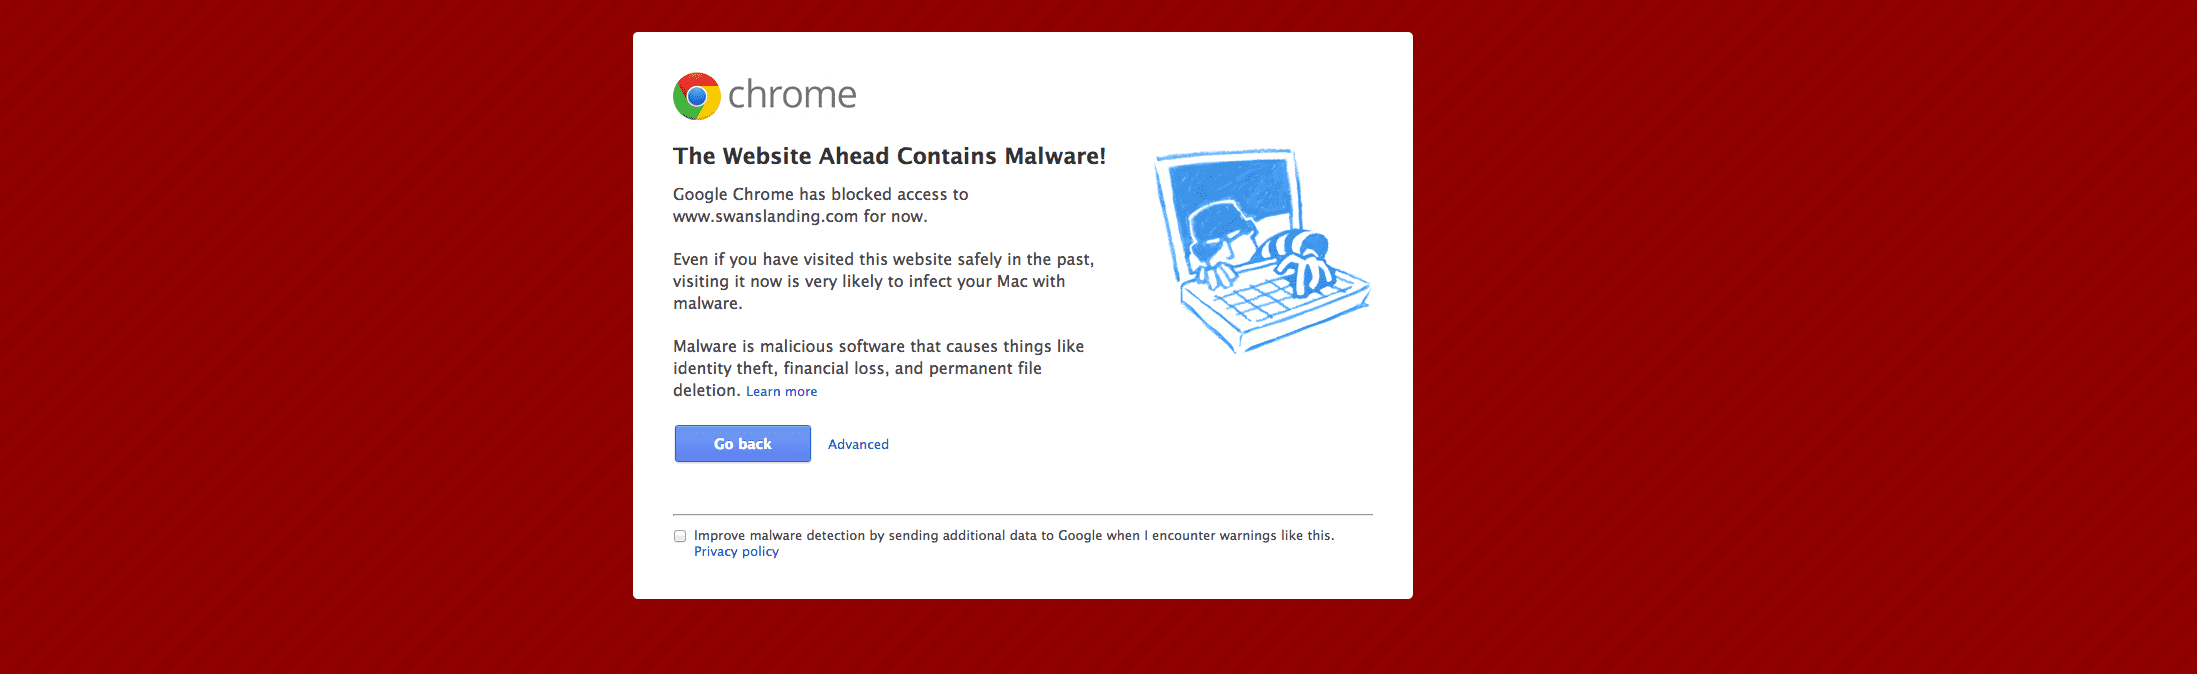 Our Protecting Website From Malware Diaries